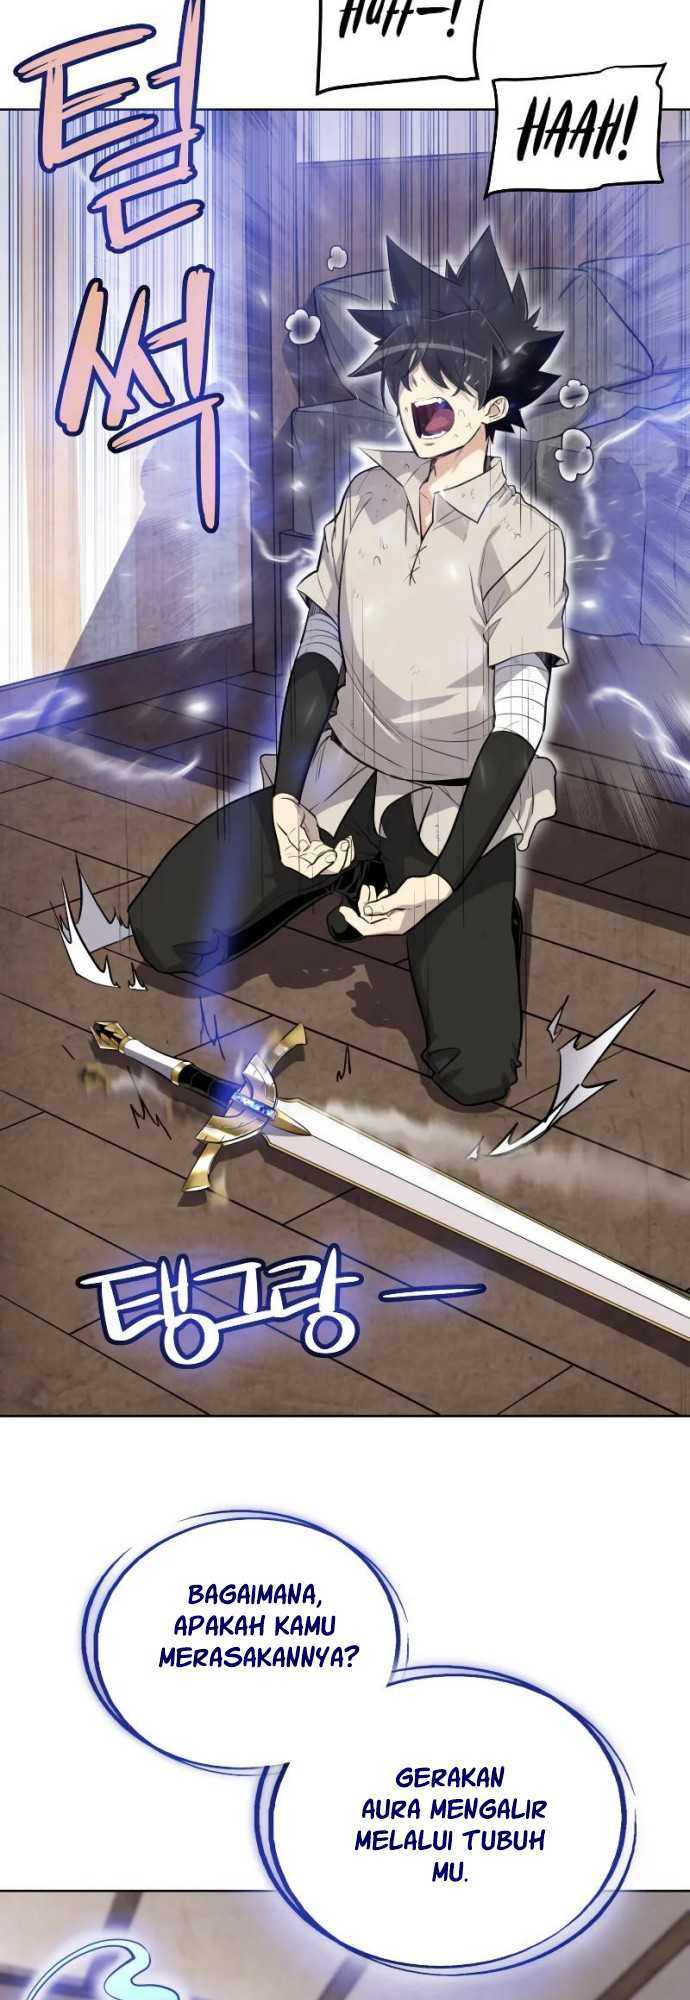 Overpowered Sword Chapter 24